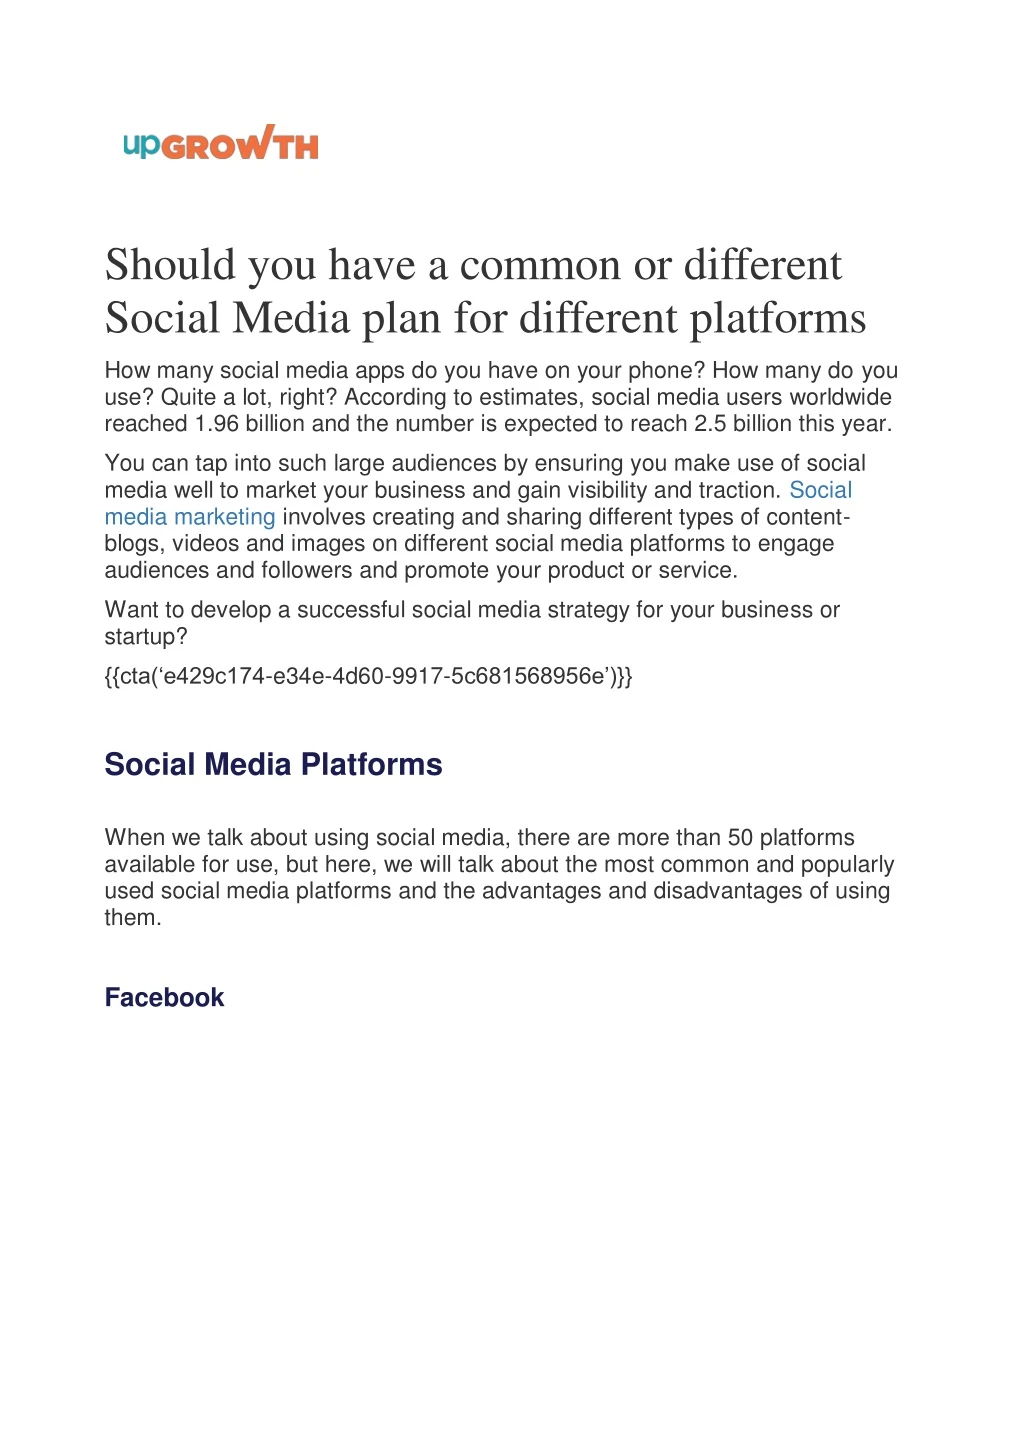 should you have a common or different social